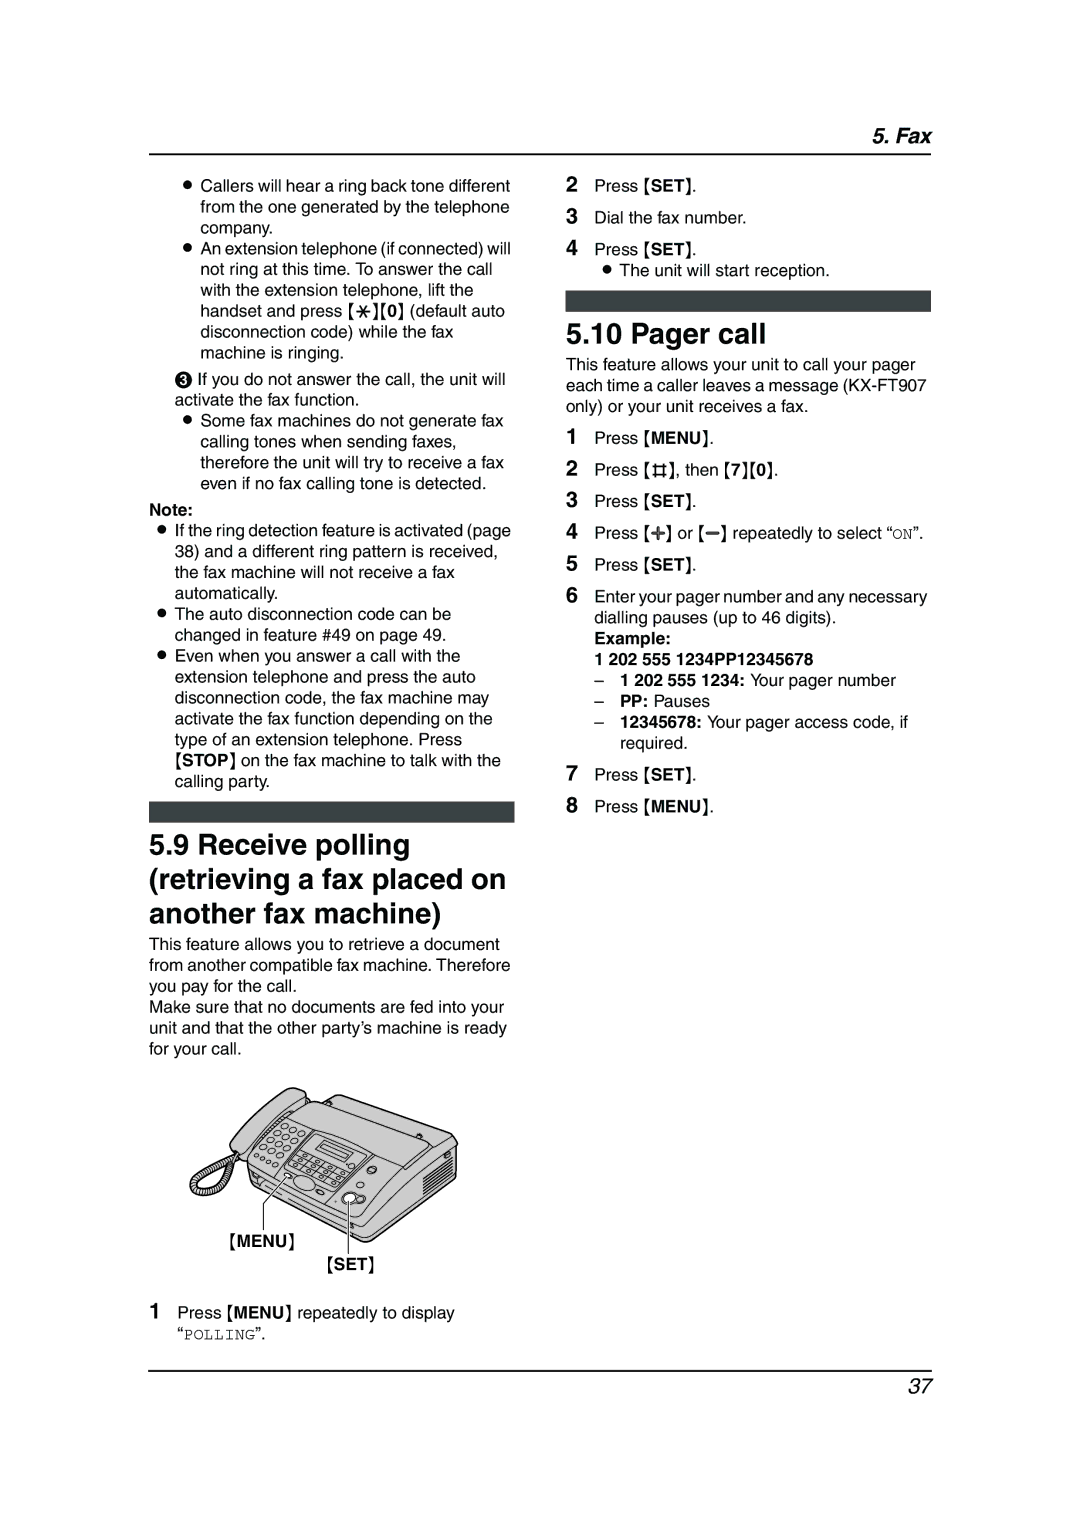 Panasonic KX-FT901BX manual Pager call, Example 202 555 1234PP12345678 